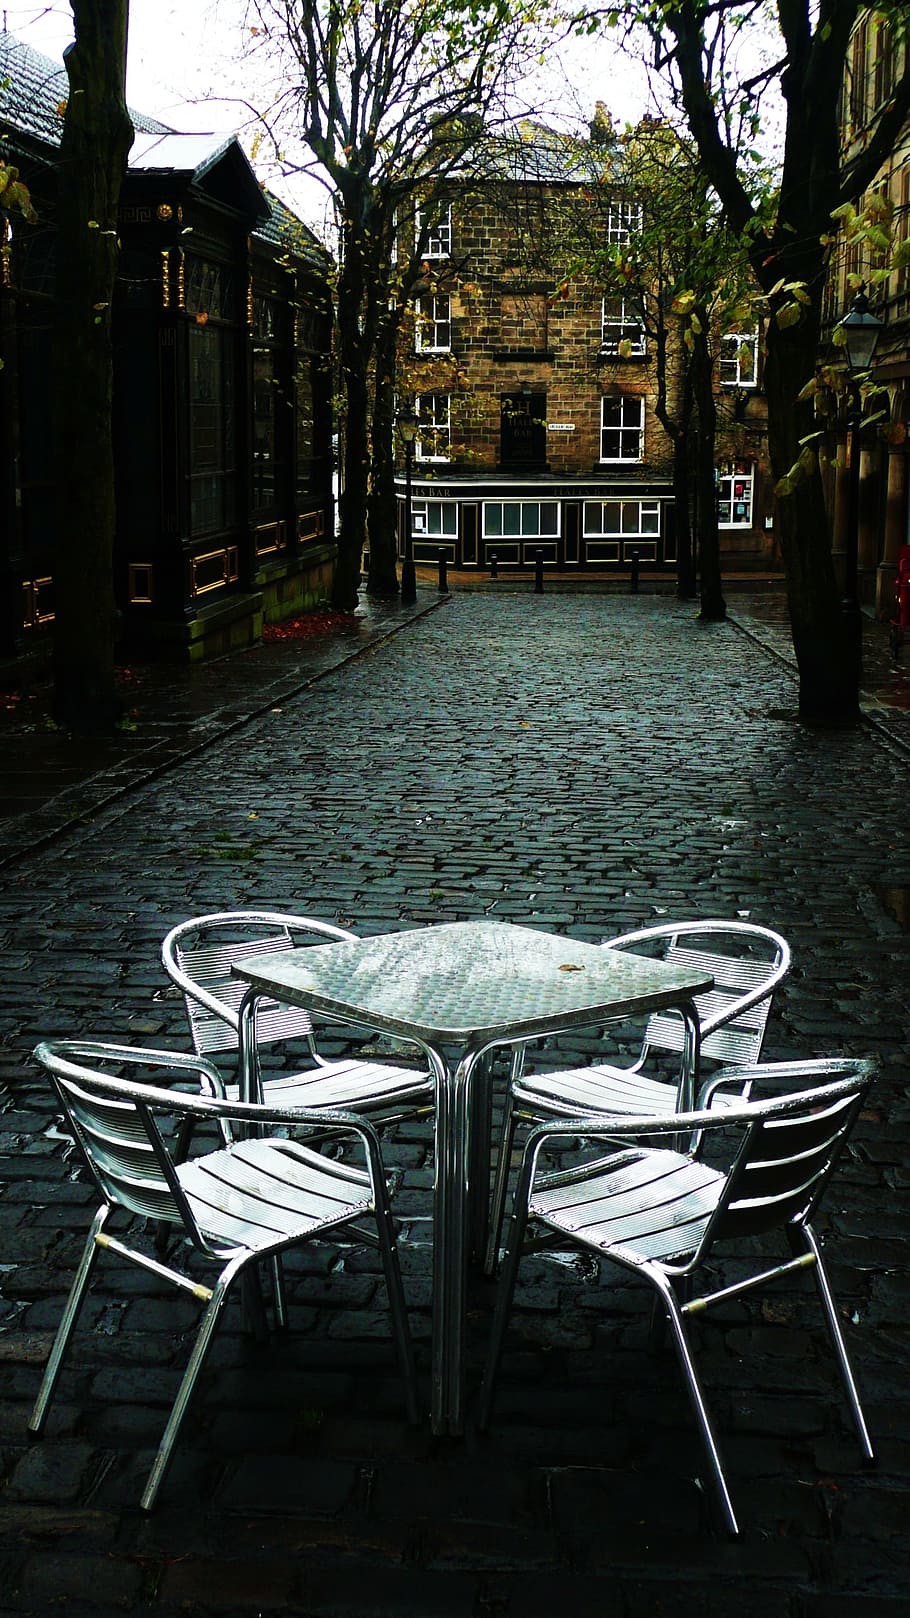 Table, Chairs, Street, Seat, Furniture, outdoor, cafe, patio